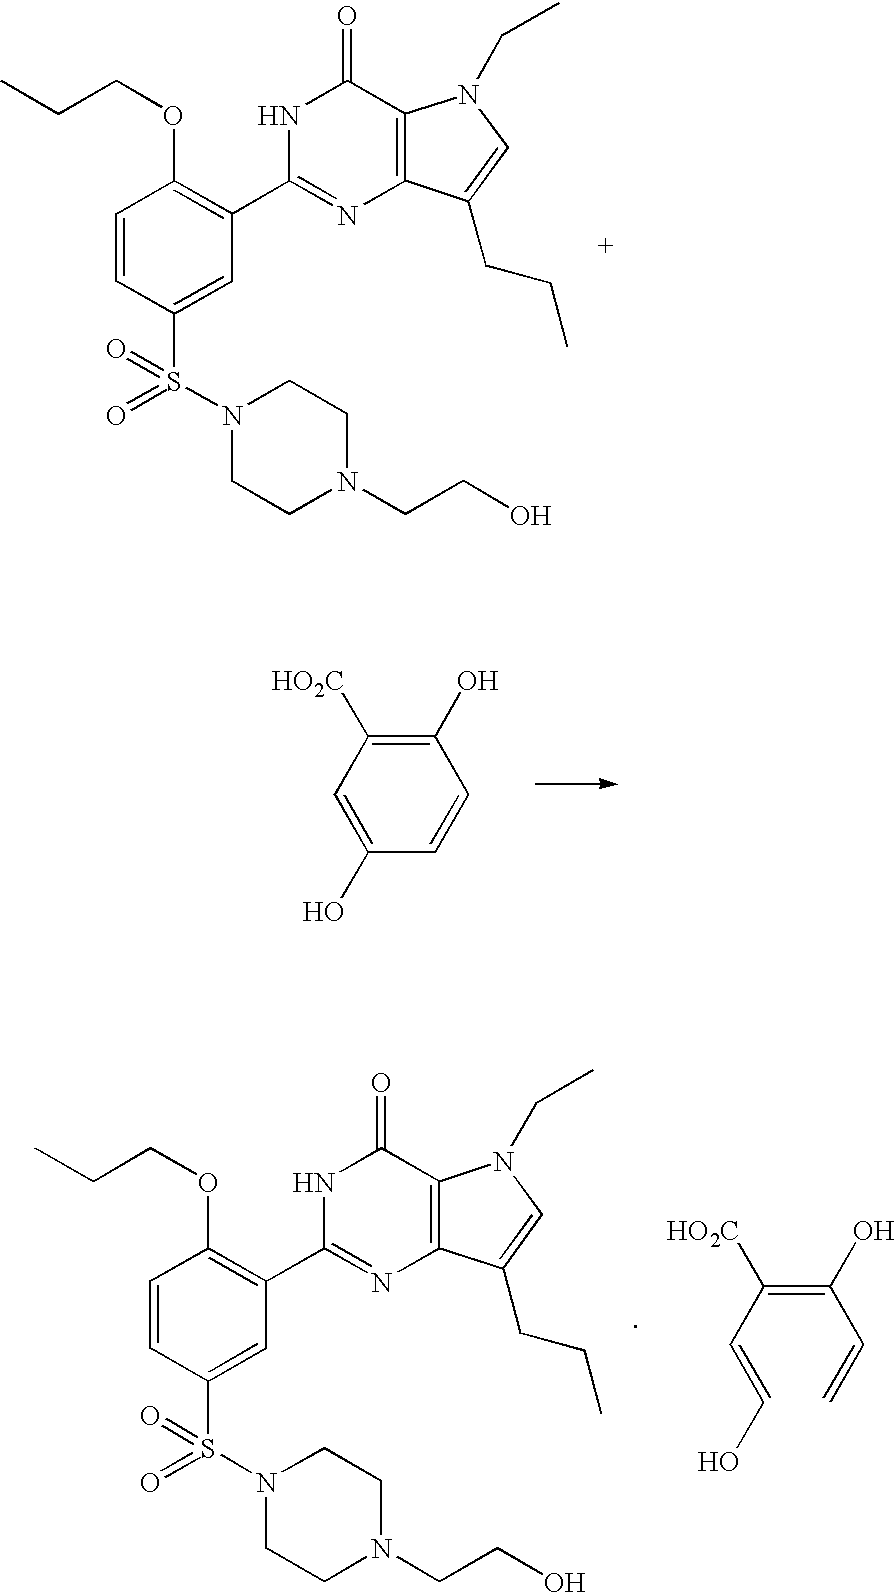 Salts of pyrrolopyrimidinone derivatives and process for preparing the same